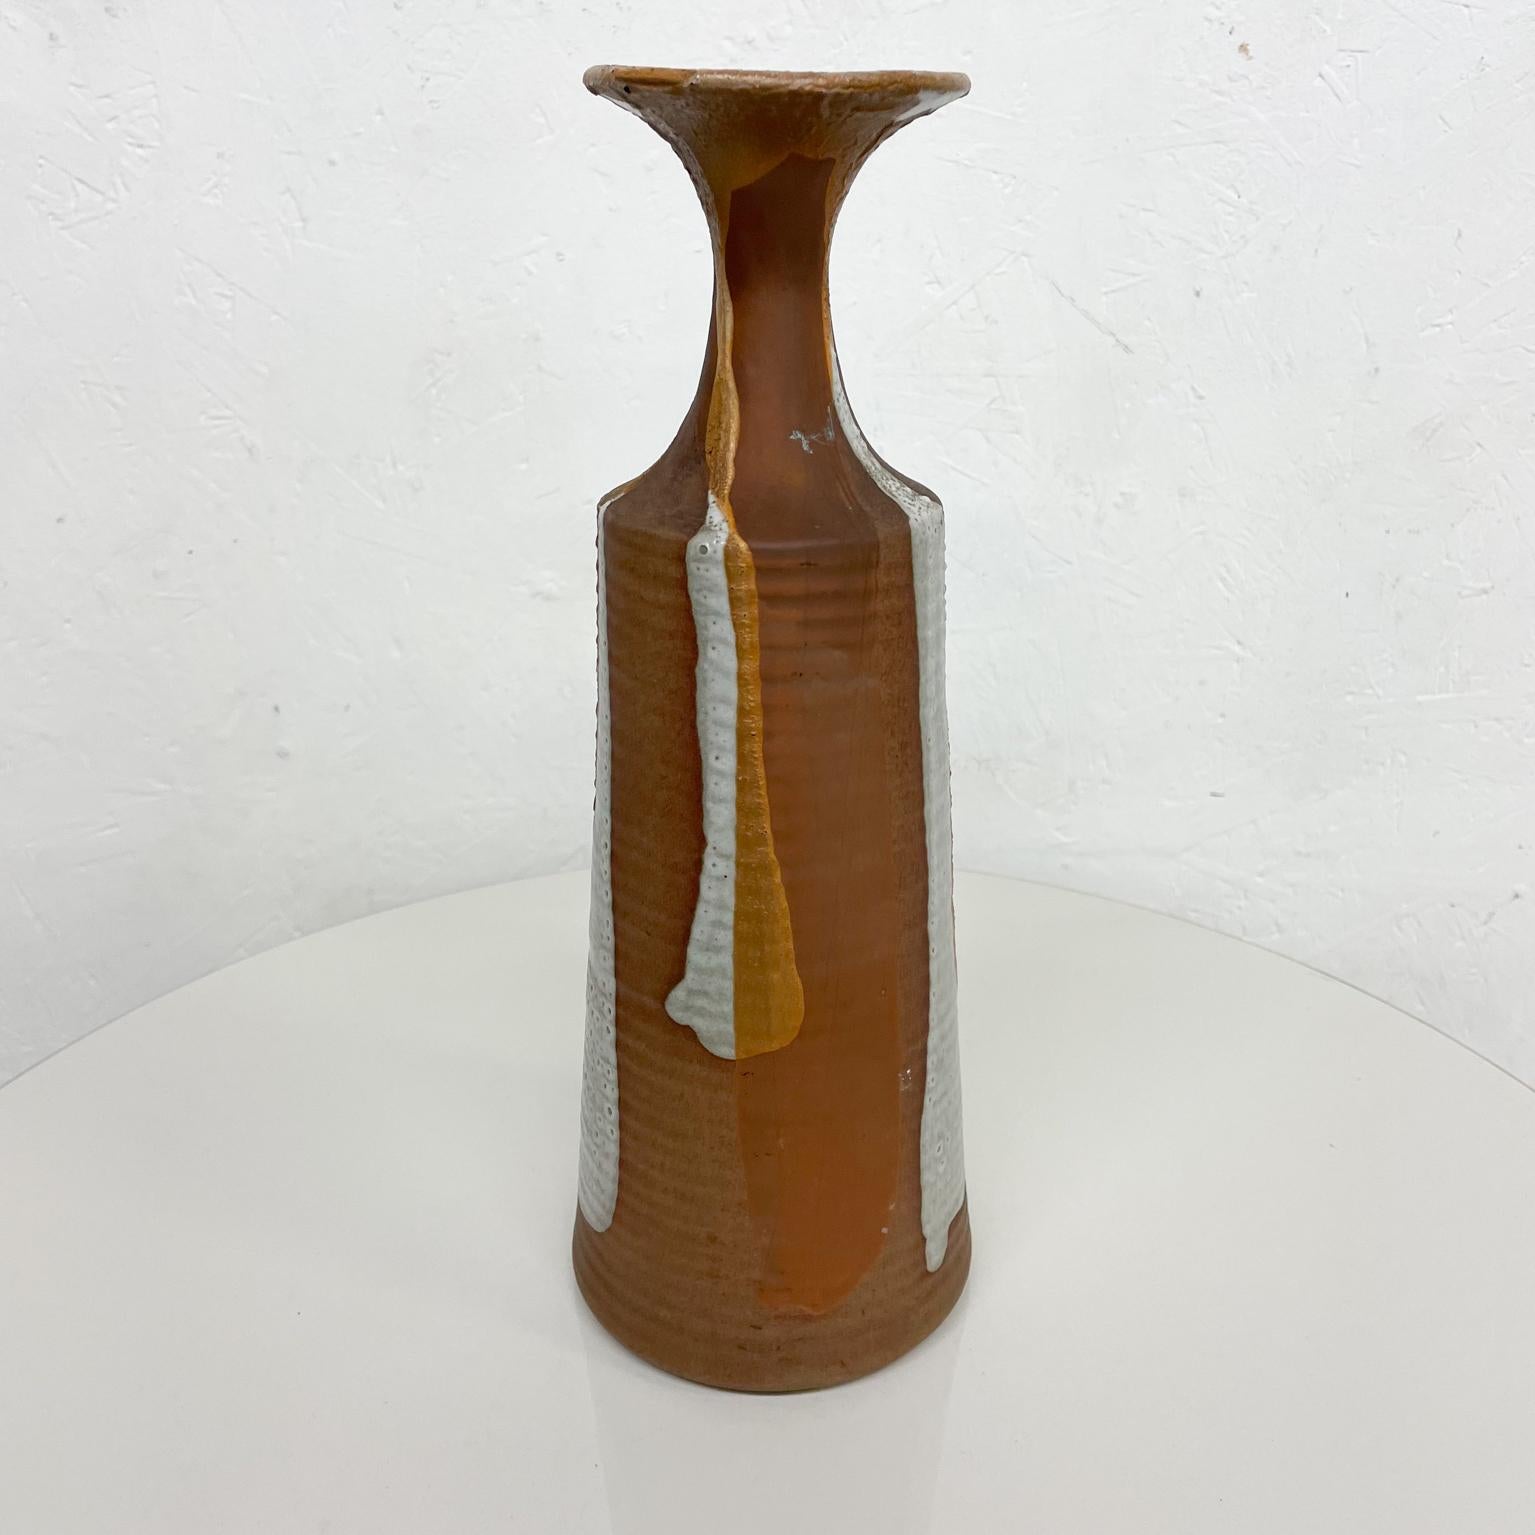 Sculptural vase
Modern Art Sculptural Vase Studio Pottery David Cressey Style midcentury modern 1970s
13.25 x 4.75 diameter
RS-30 C stamped on bottom
Preowned original good vintage condition.
Refer to images provided.

 